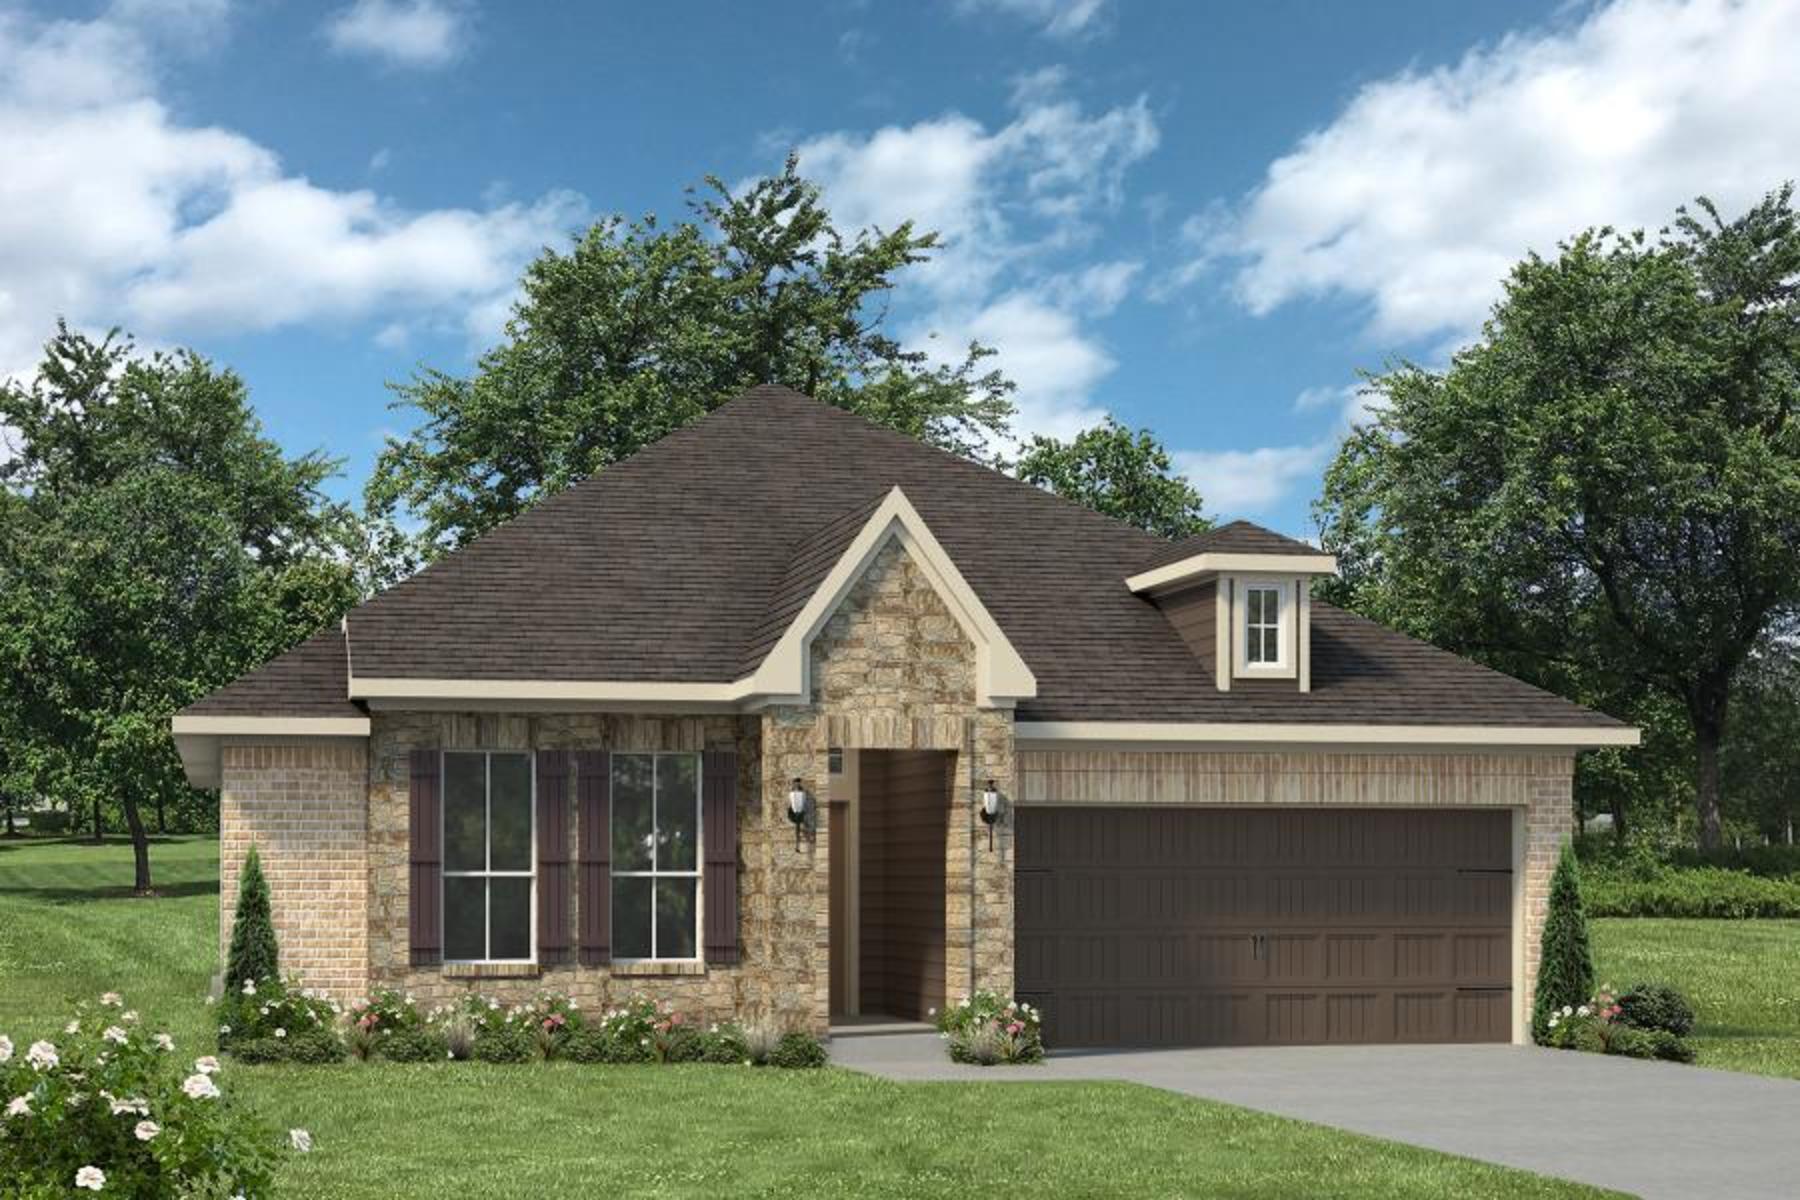 https://myhome.anewgo.com/client/stylecraft/community/Build%20On%20Your%20Lot/plan/1514%20%7C%20Bedford%20Classic?elevId=22. Bedford Home with 3 Bedrooms